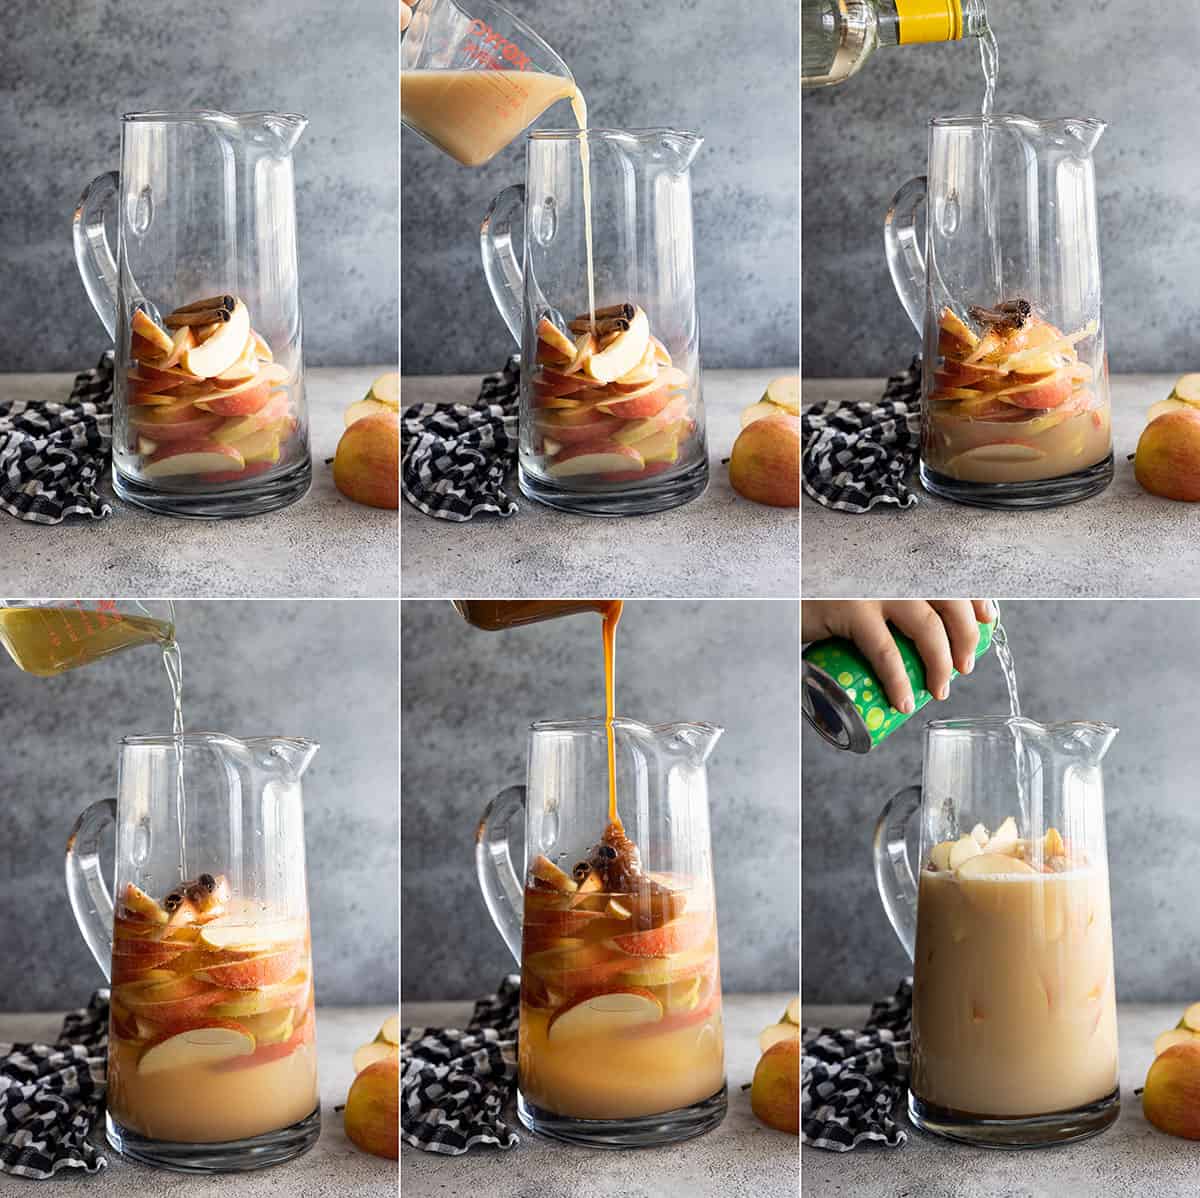 Six pictures showing how to make the sangria. 